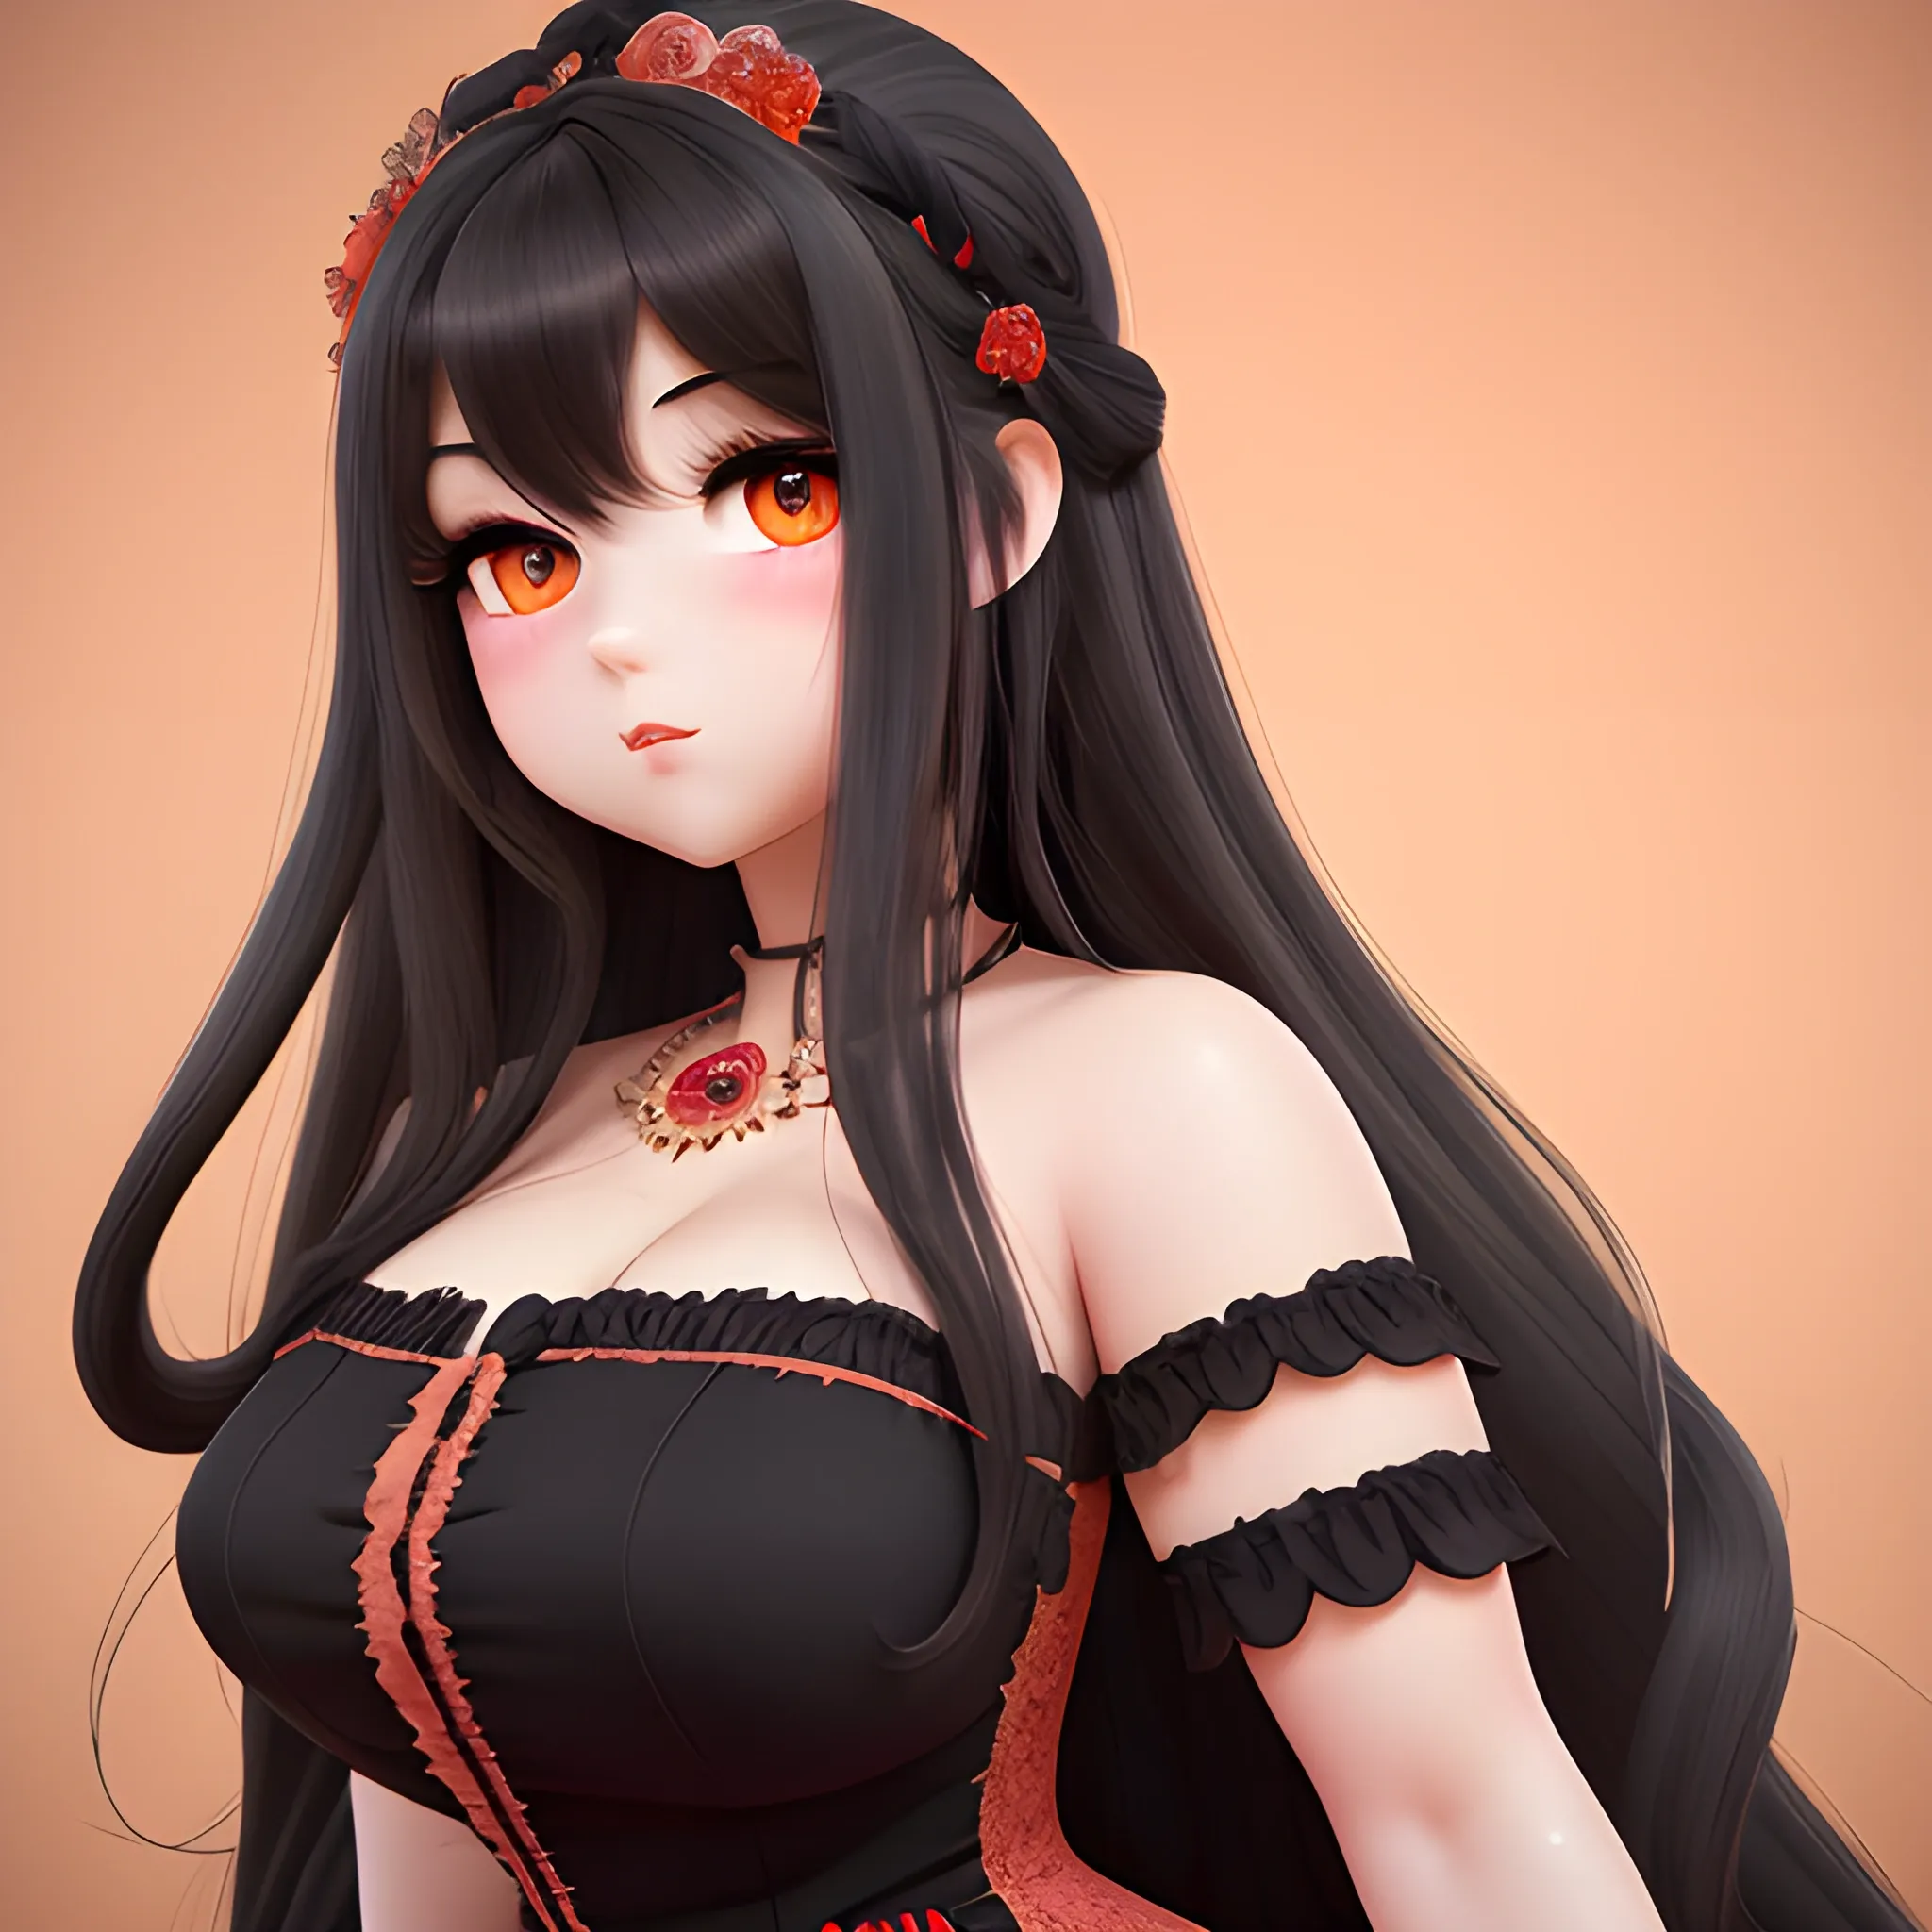 (((high detail))), best quality, Warm Colors, (detailed), (high resolution)Black long-haired female, curvy face, with rosy cheeks, big black eyes, thick eyelashes, thick peach lips, thick eyebrows, nose upturned, with a black and red dress, i want the harem 